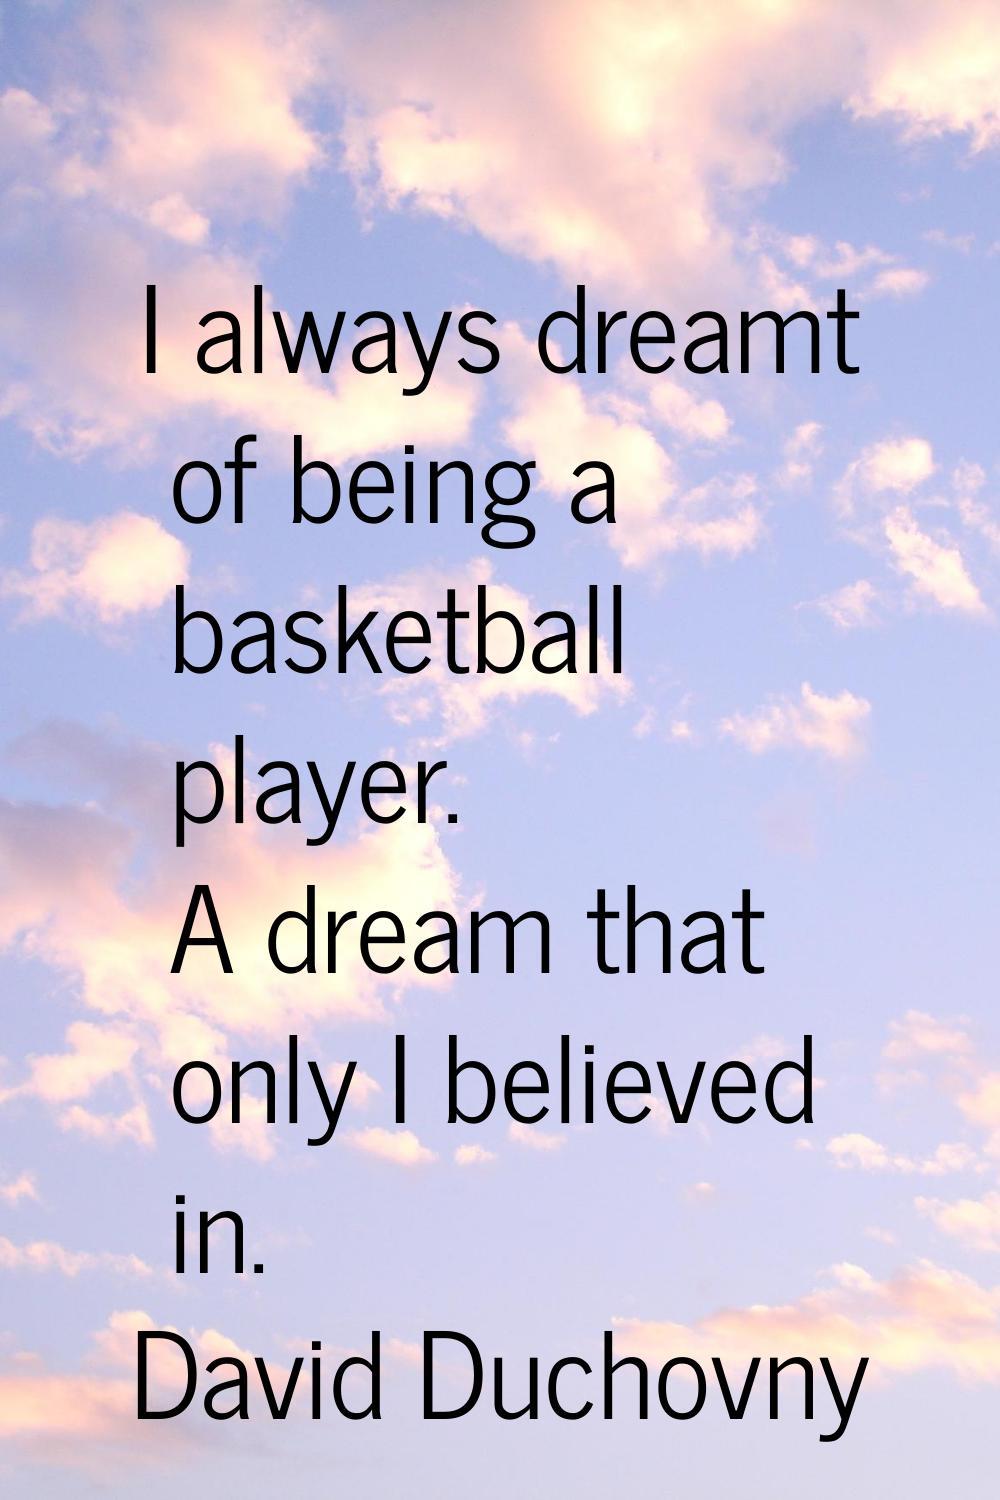 I always dreamt of being a basketball player. A dream that only I believed in.